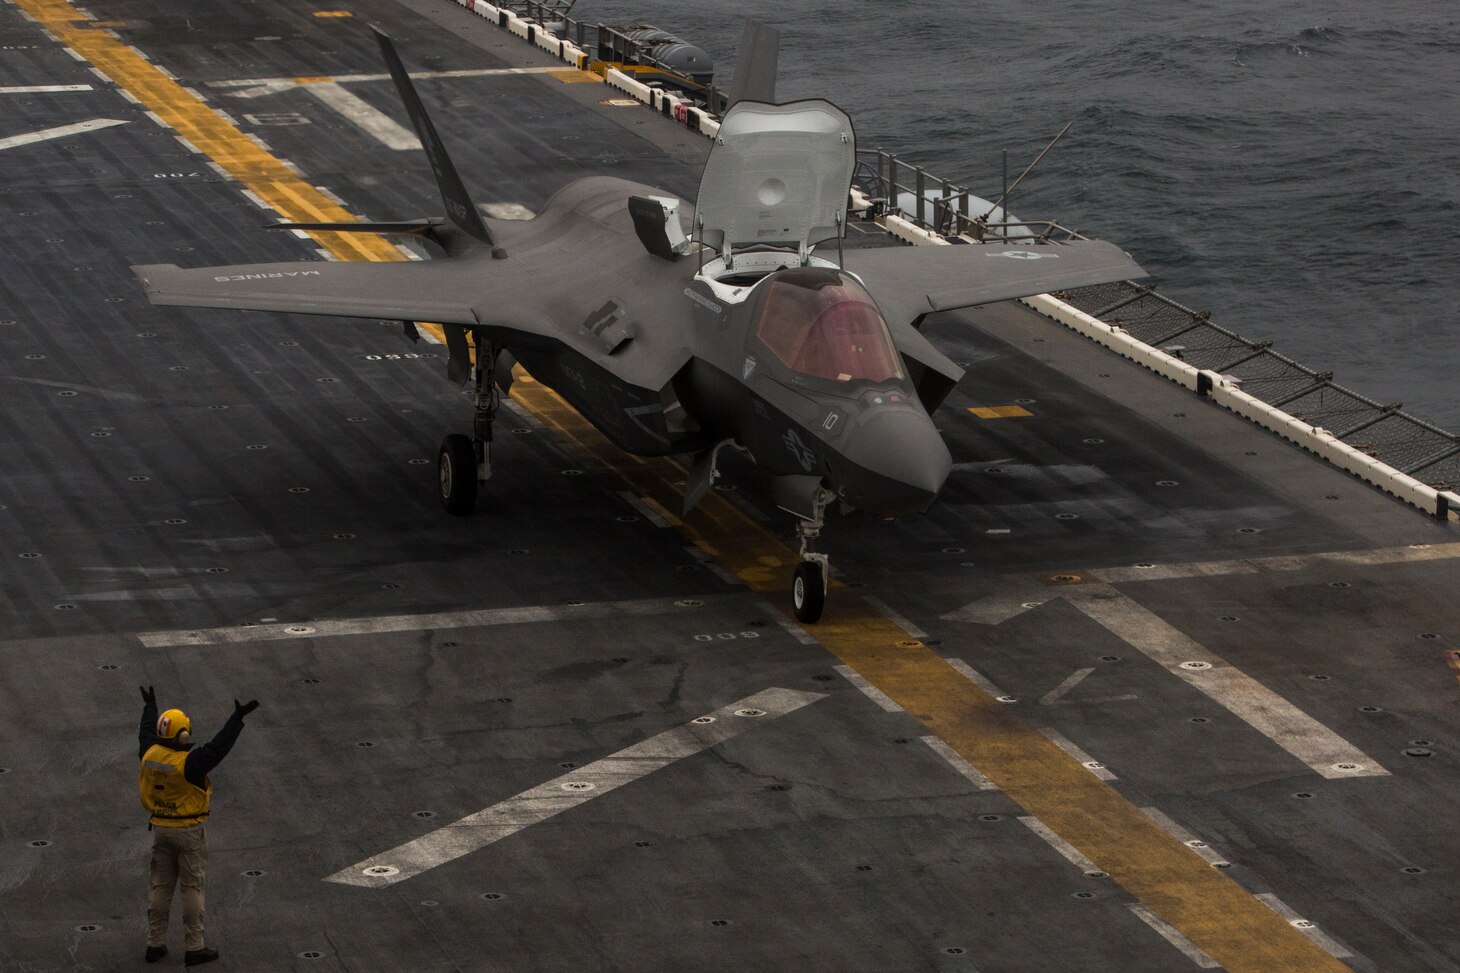 An F-35B Lightning II touches down on the USS Wasp (LHD-1), marking the F-35B’s first operational deployment with a Marine Expeditionary Unit, March 5, 2018.  Marine Fighter Attack Squadron 121 embarked a detachment of F-35Bs on the USS Wasp for the 31st Marine Expeditionary Unit’s Spring Patrol 2018.  As the Marine Corps' only continuously forward-deployed MEU, the 31st MEU provides a flexible force ready to perform a wide range of military operations.